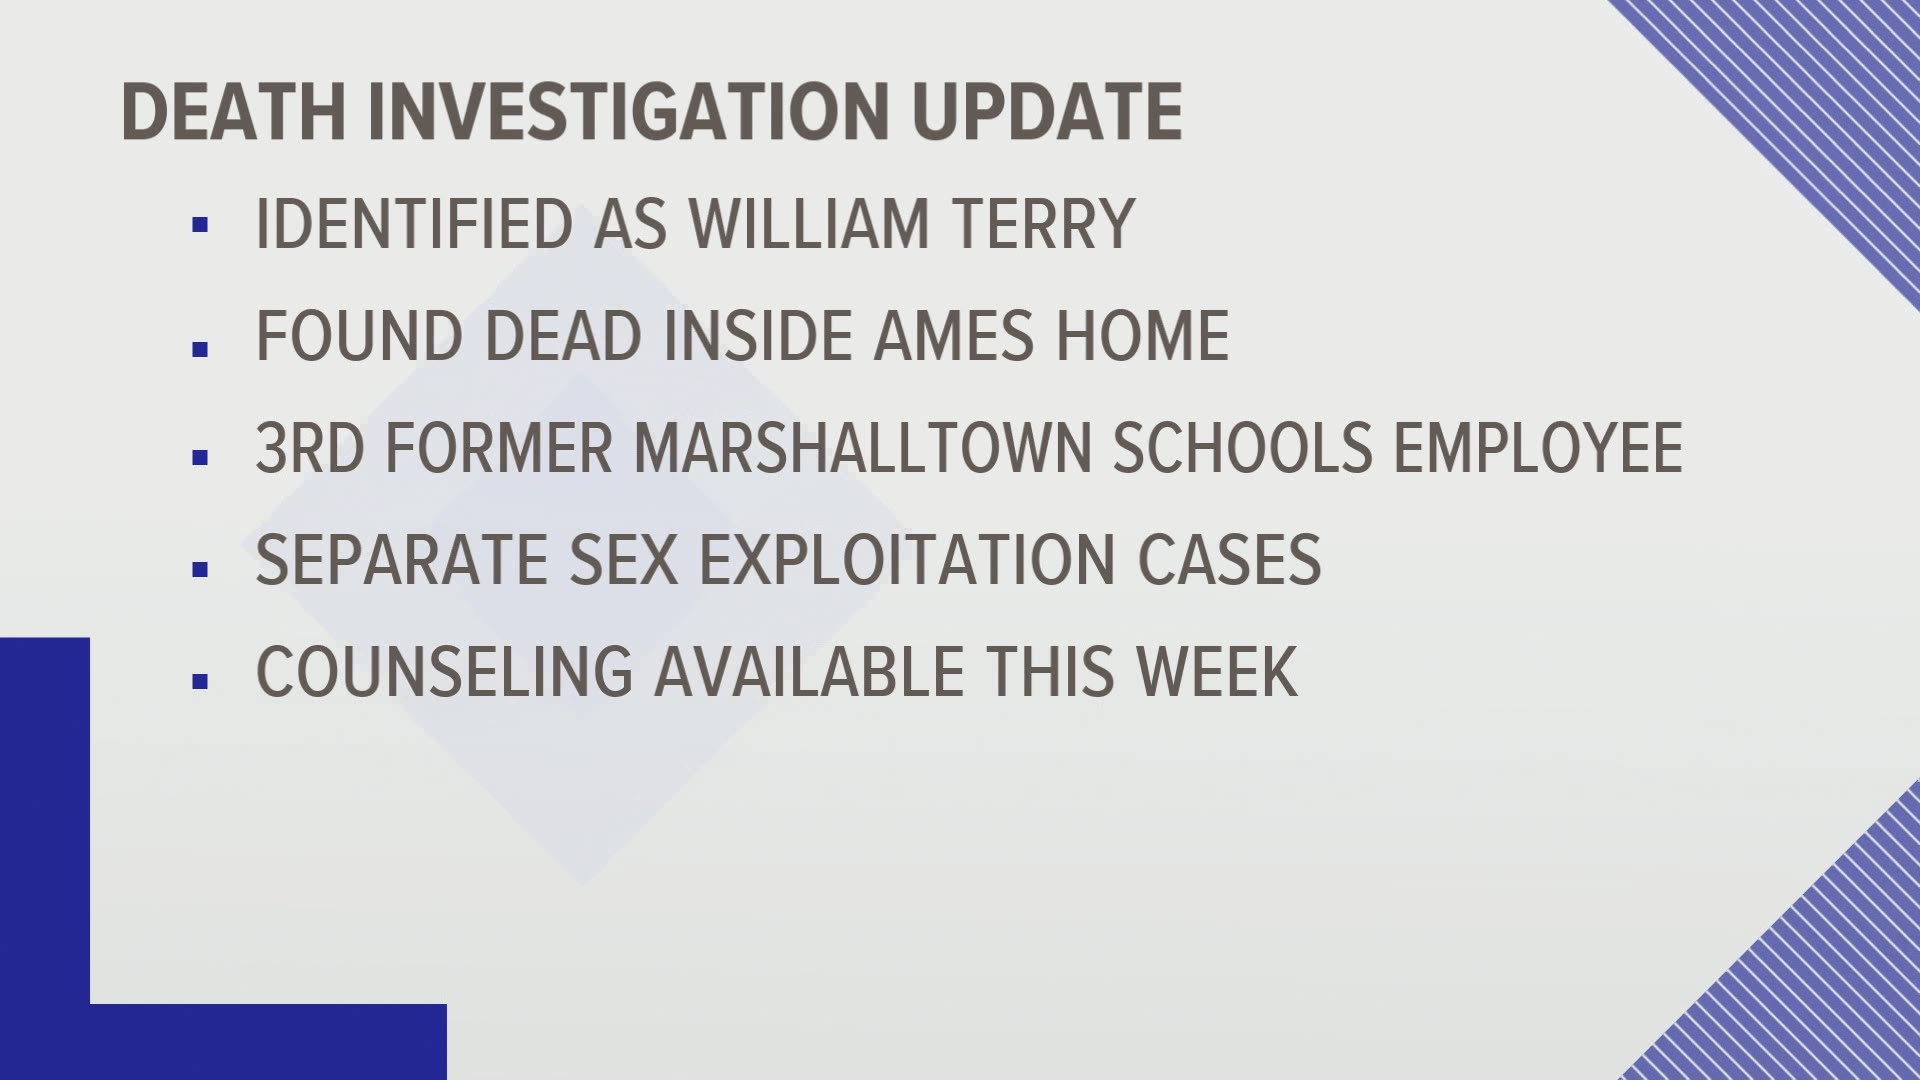 A former Marshalltown school employee accused of sexual exploitation was found dead in his Ames home, according to police and the district.